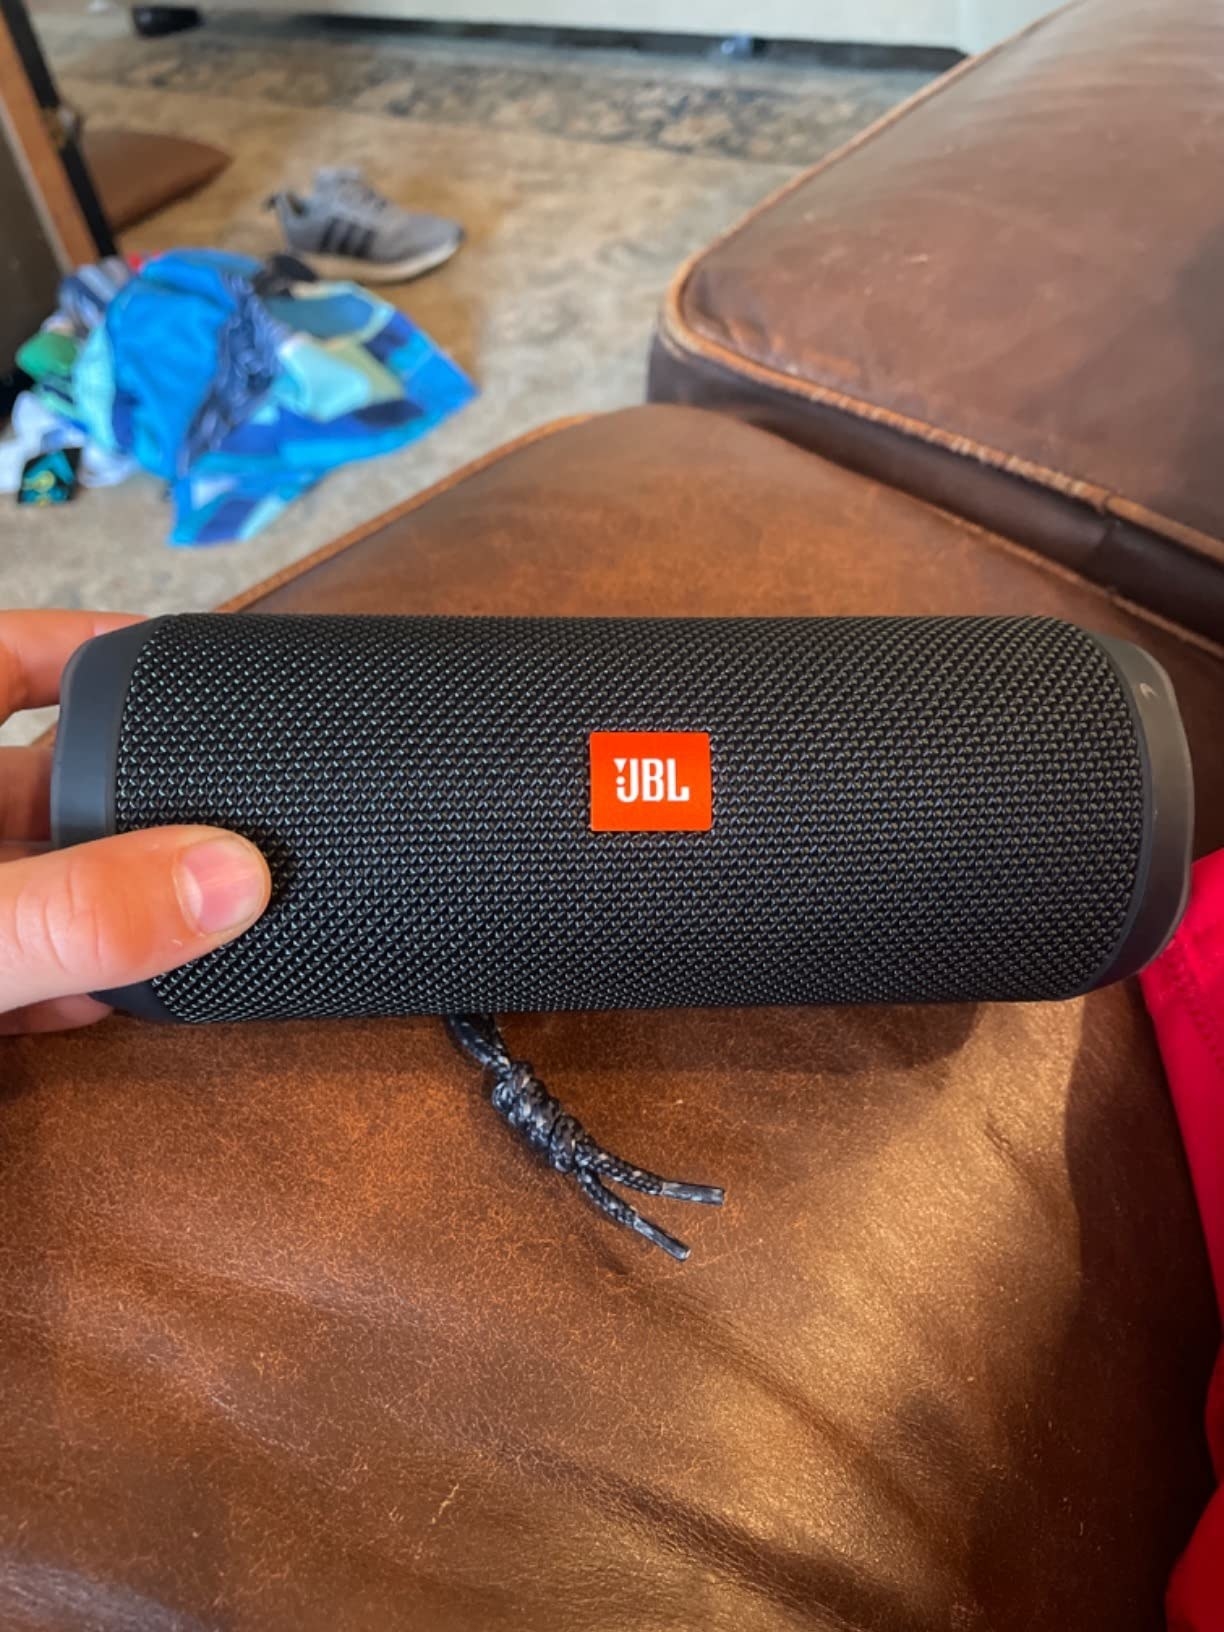 The JBL speaker on a couch